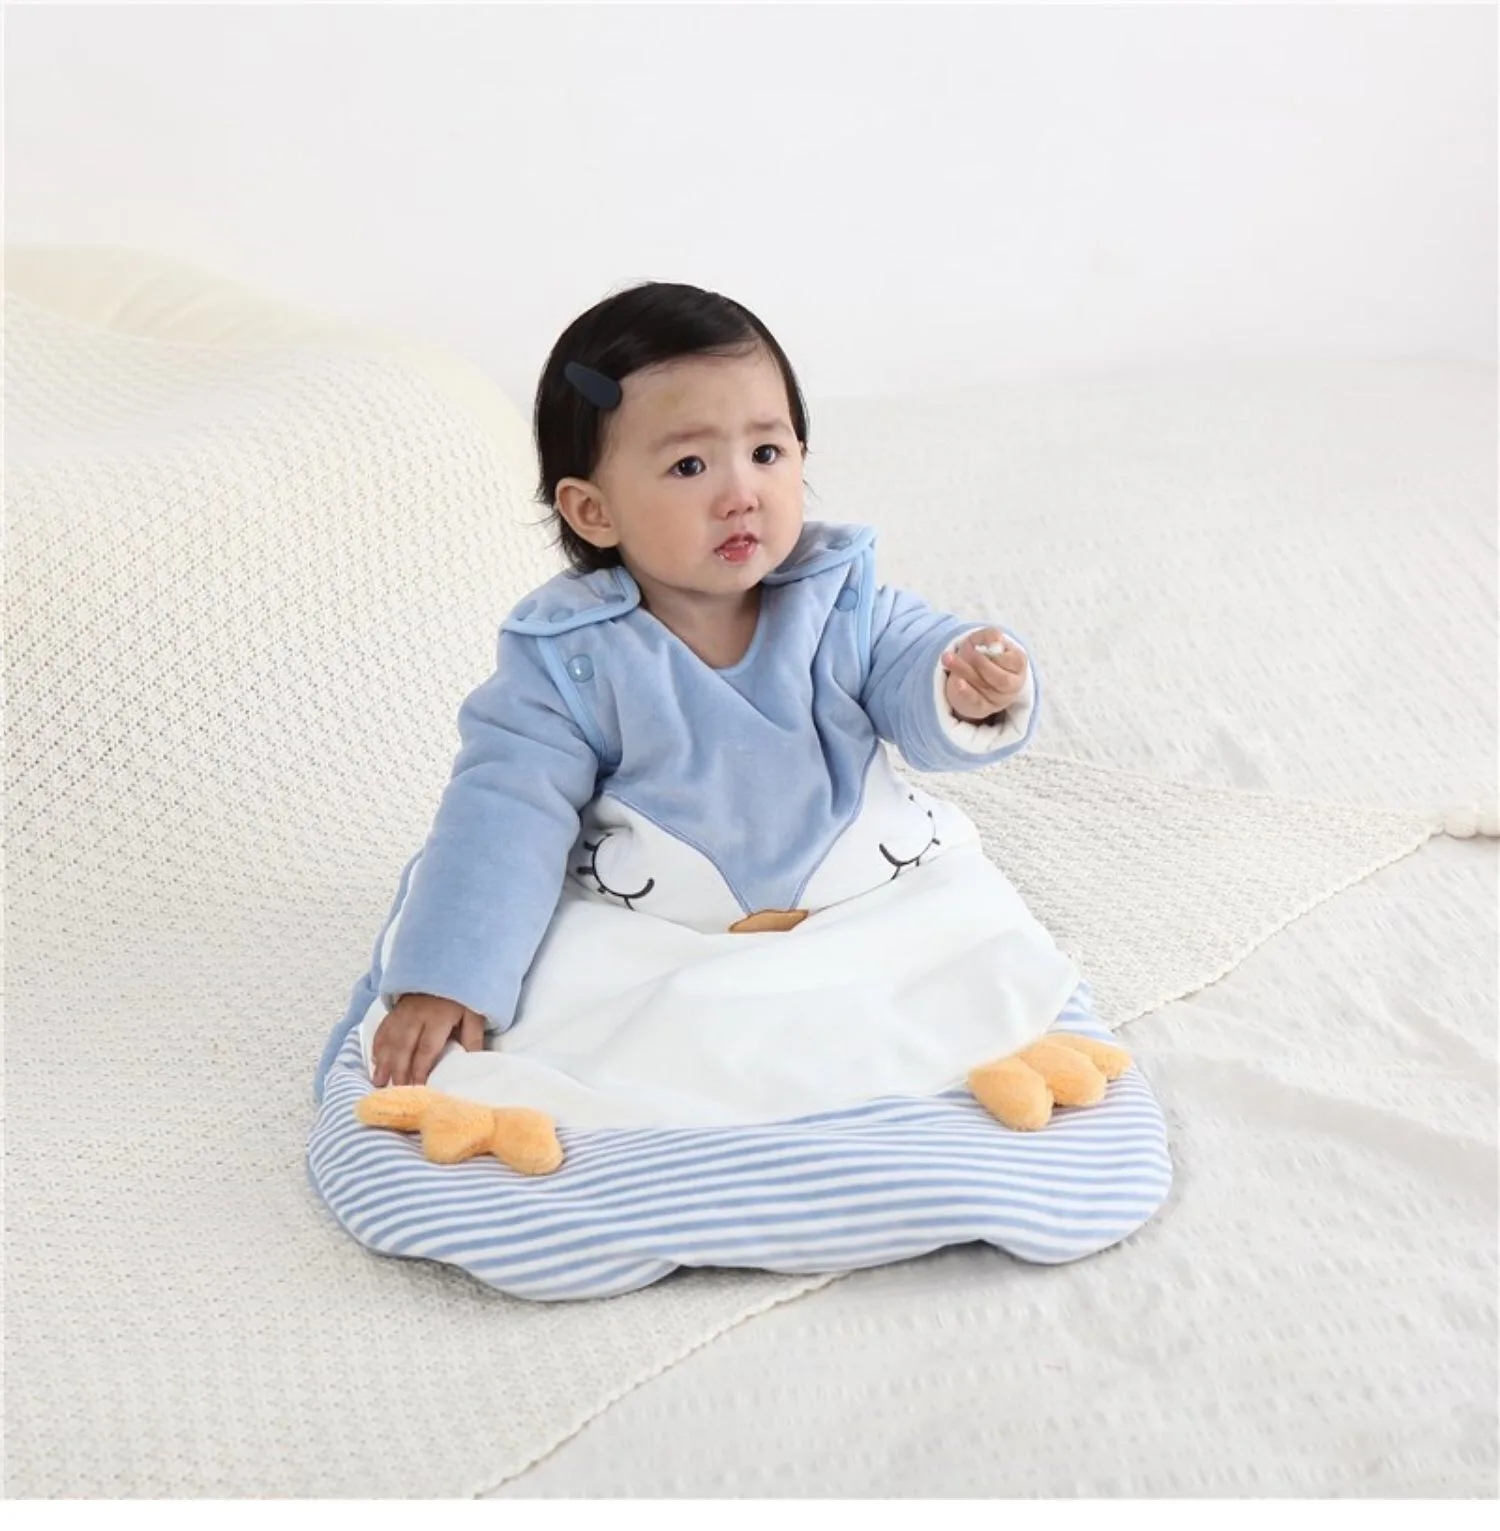 

Baby Sleeping Bag detachable sleeves high quality fabric soft and ideal for sensitive baby skin